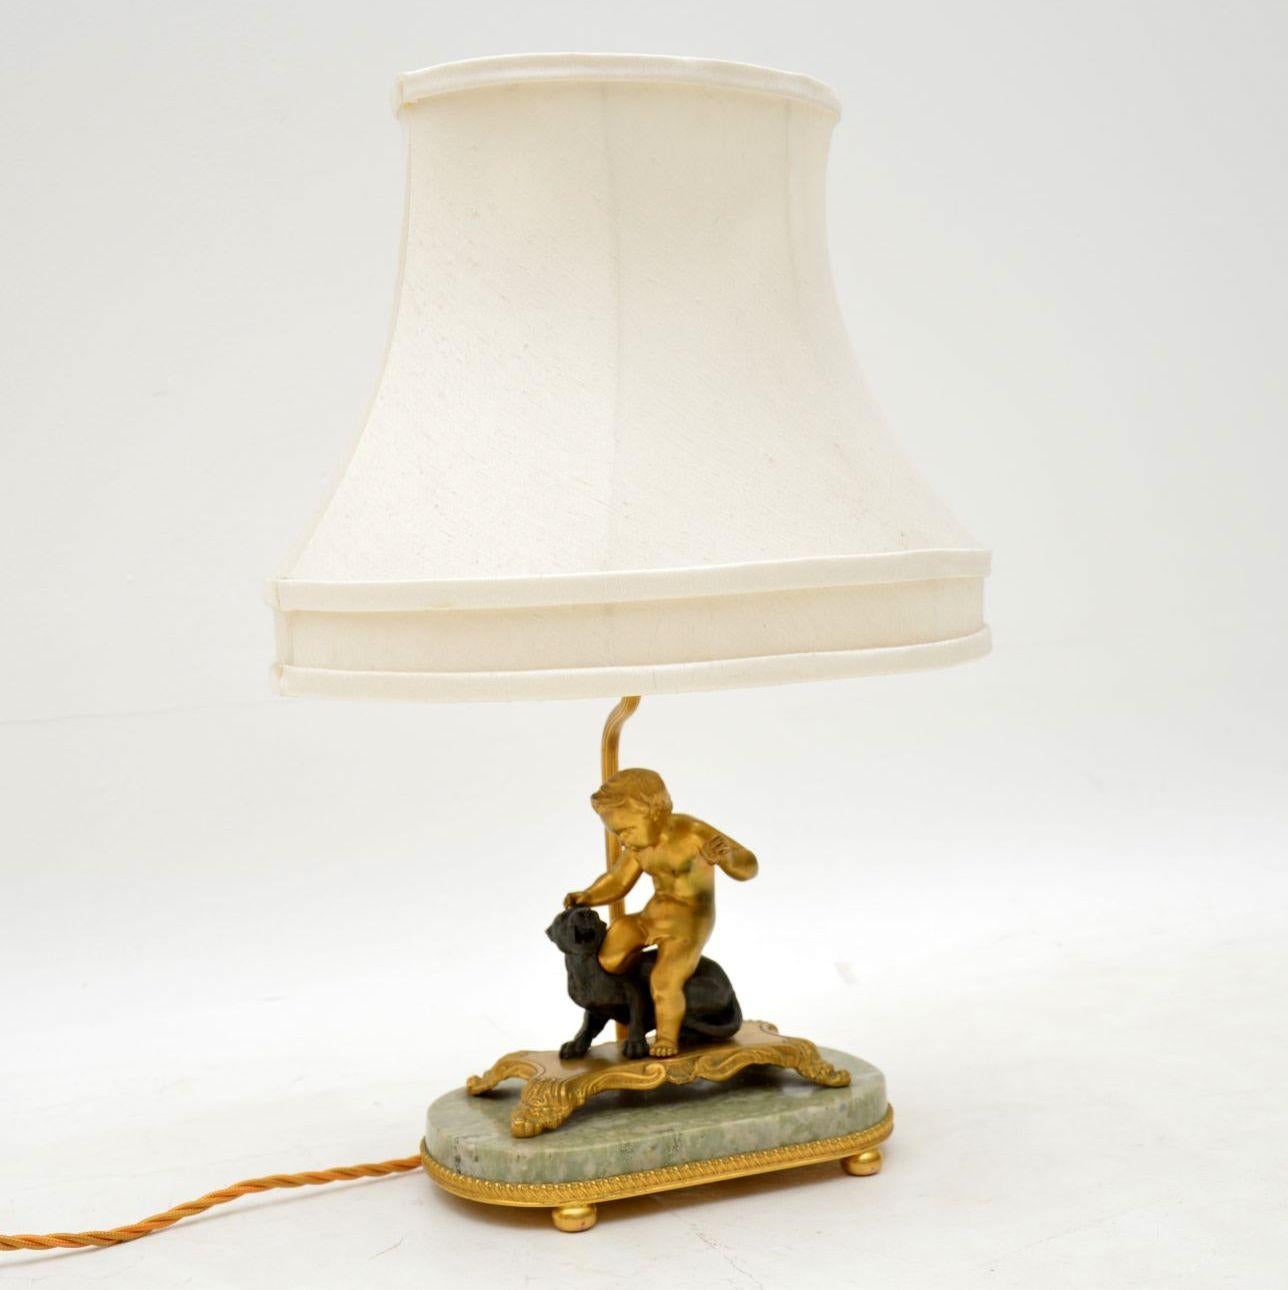 Antique French gilt bronze table lamp in the form of a cherub with a lion (I think), mounted on a marble base with more gilt decoration. This is a very attractive small lamp, which still has the old shade, which to be honest is a bit tatty mainly on